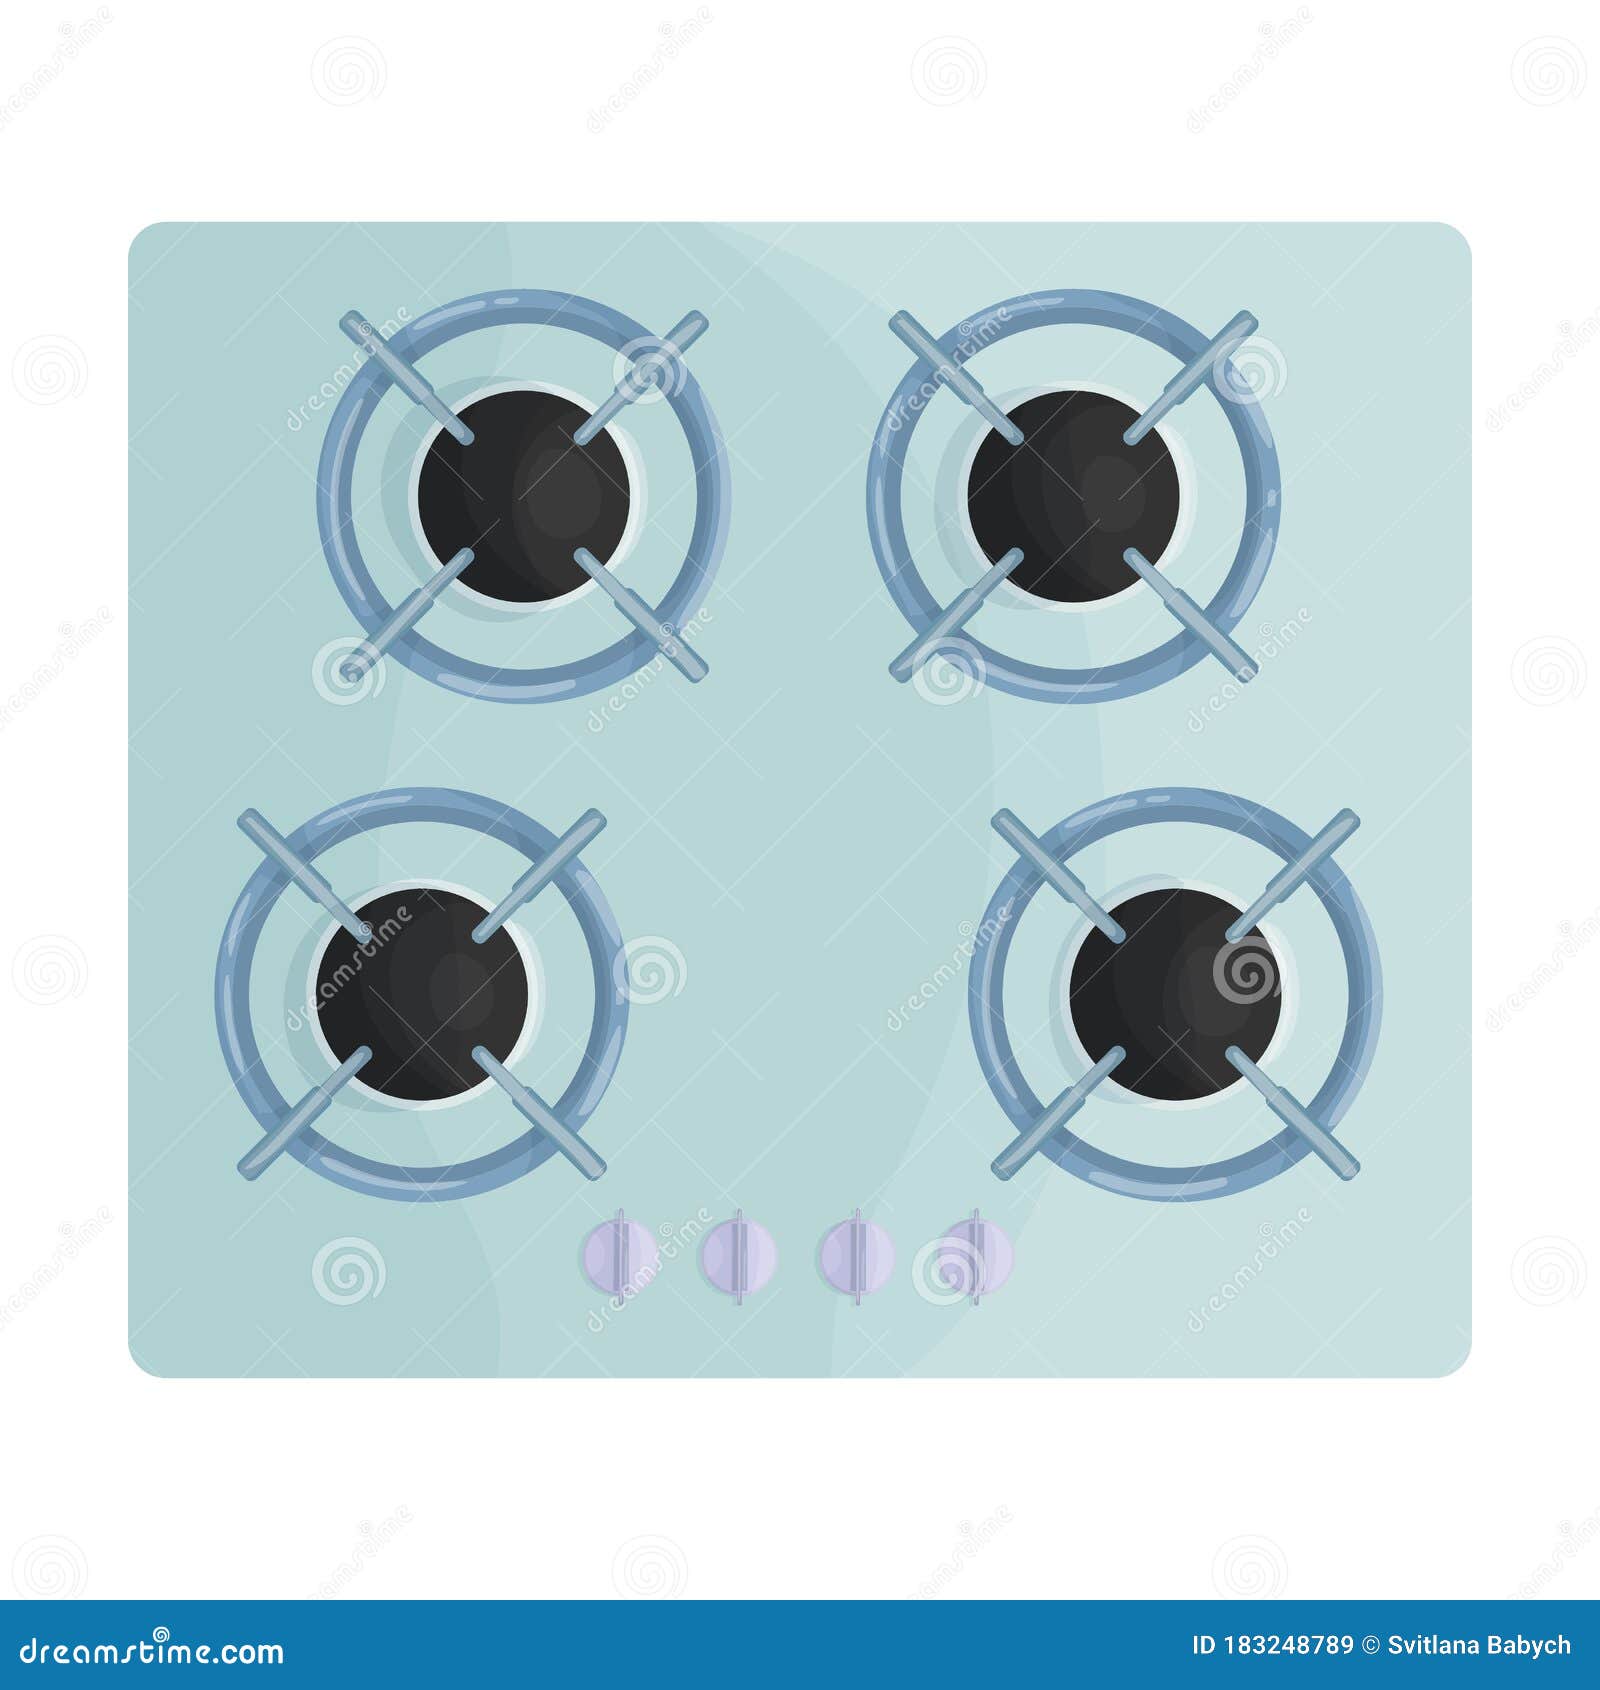 Gas Stove Vector  Vector Icon Isolated on White Background Gas  Stove. Stock Vector - Illustration of metal, induction: 183248789